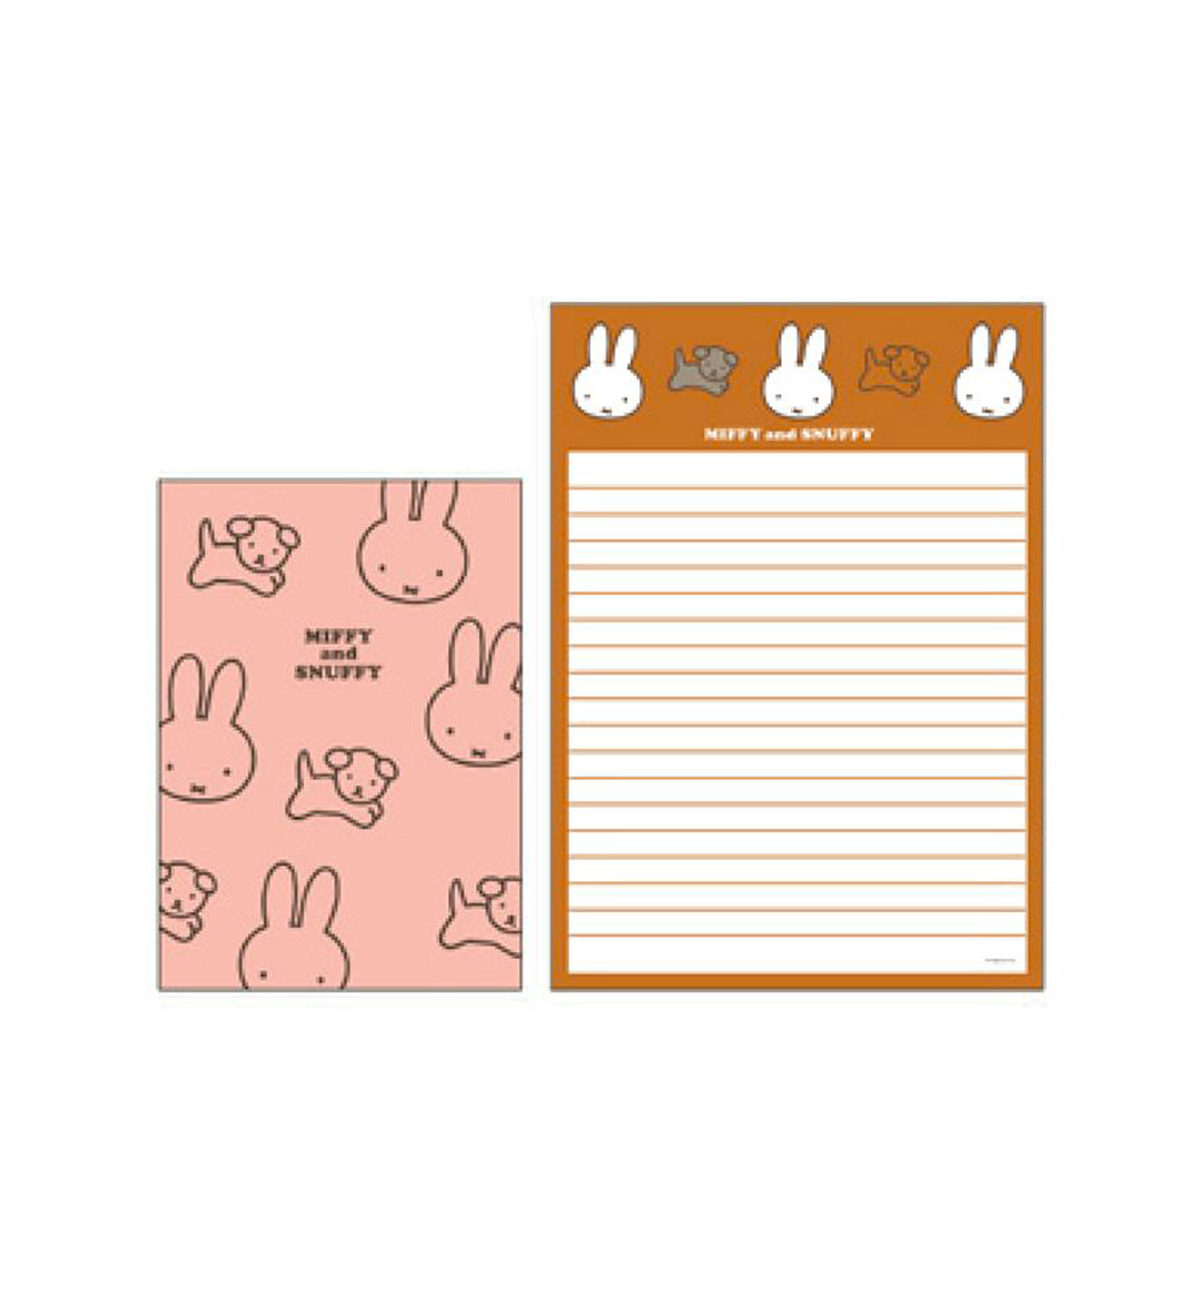 Miffy & Snuffy Letter Set [Brown]